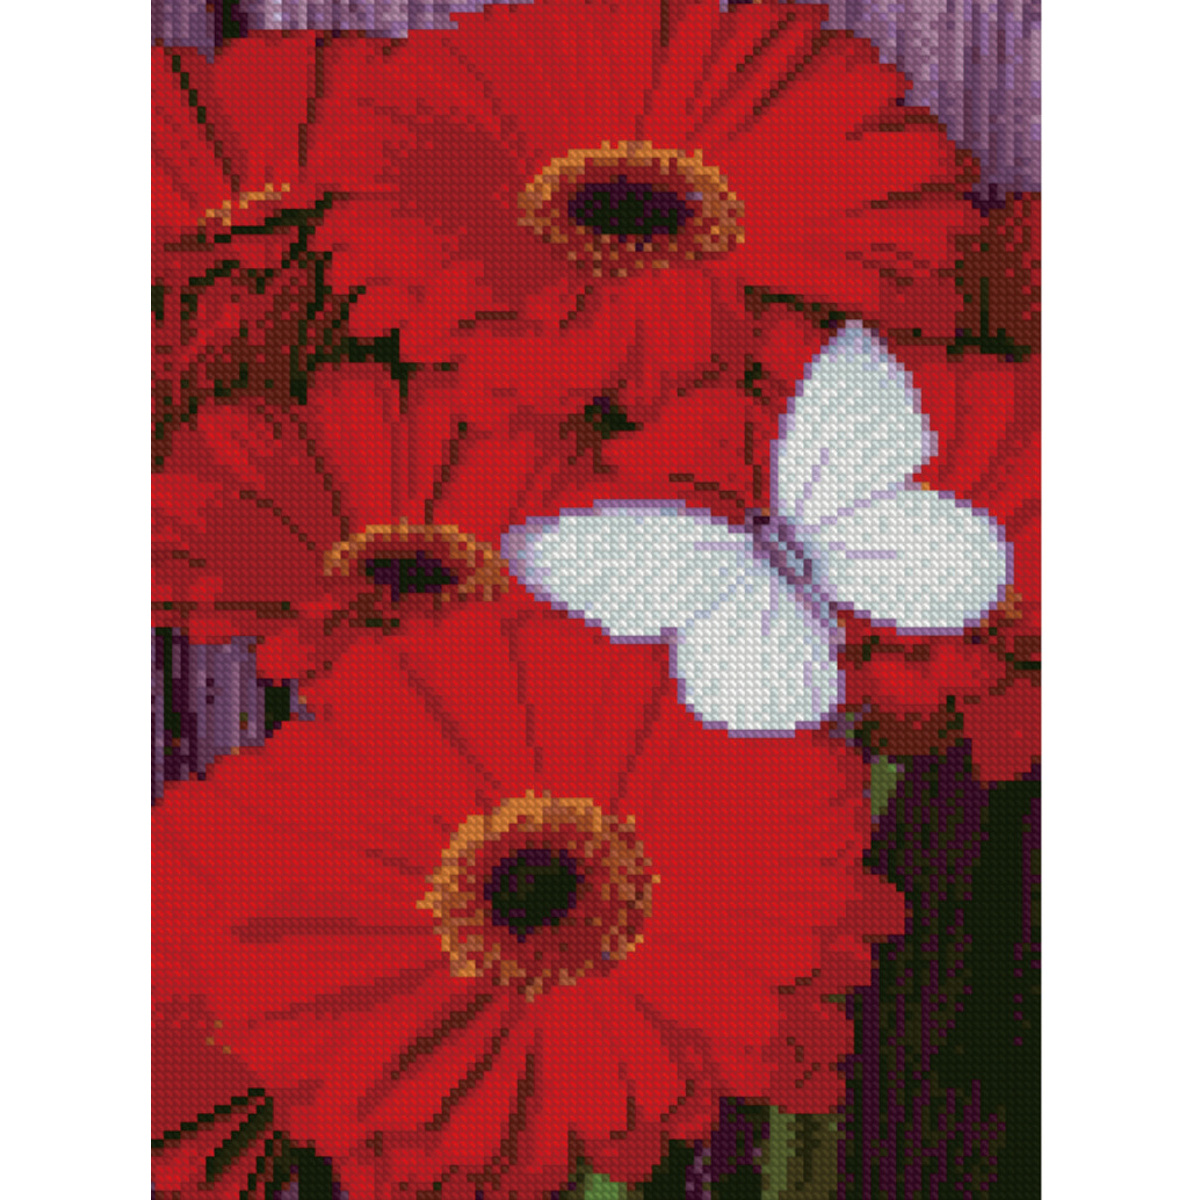 Diamond picture HX215 "Butterfly on asters", size 30x40 cm